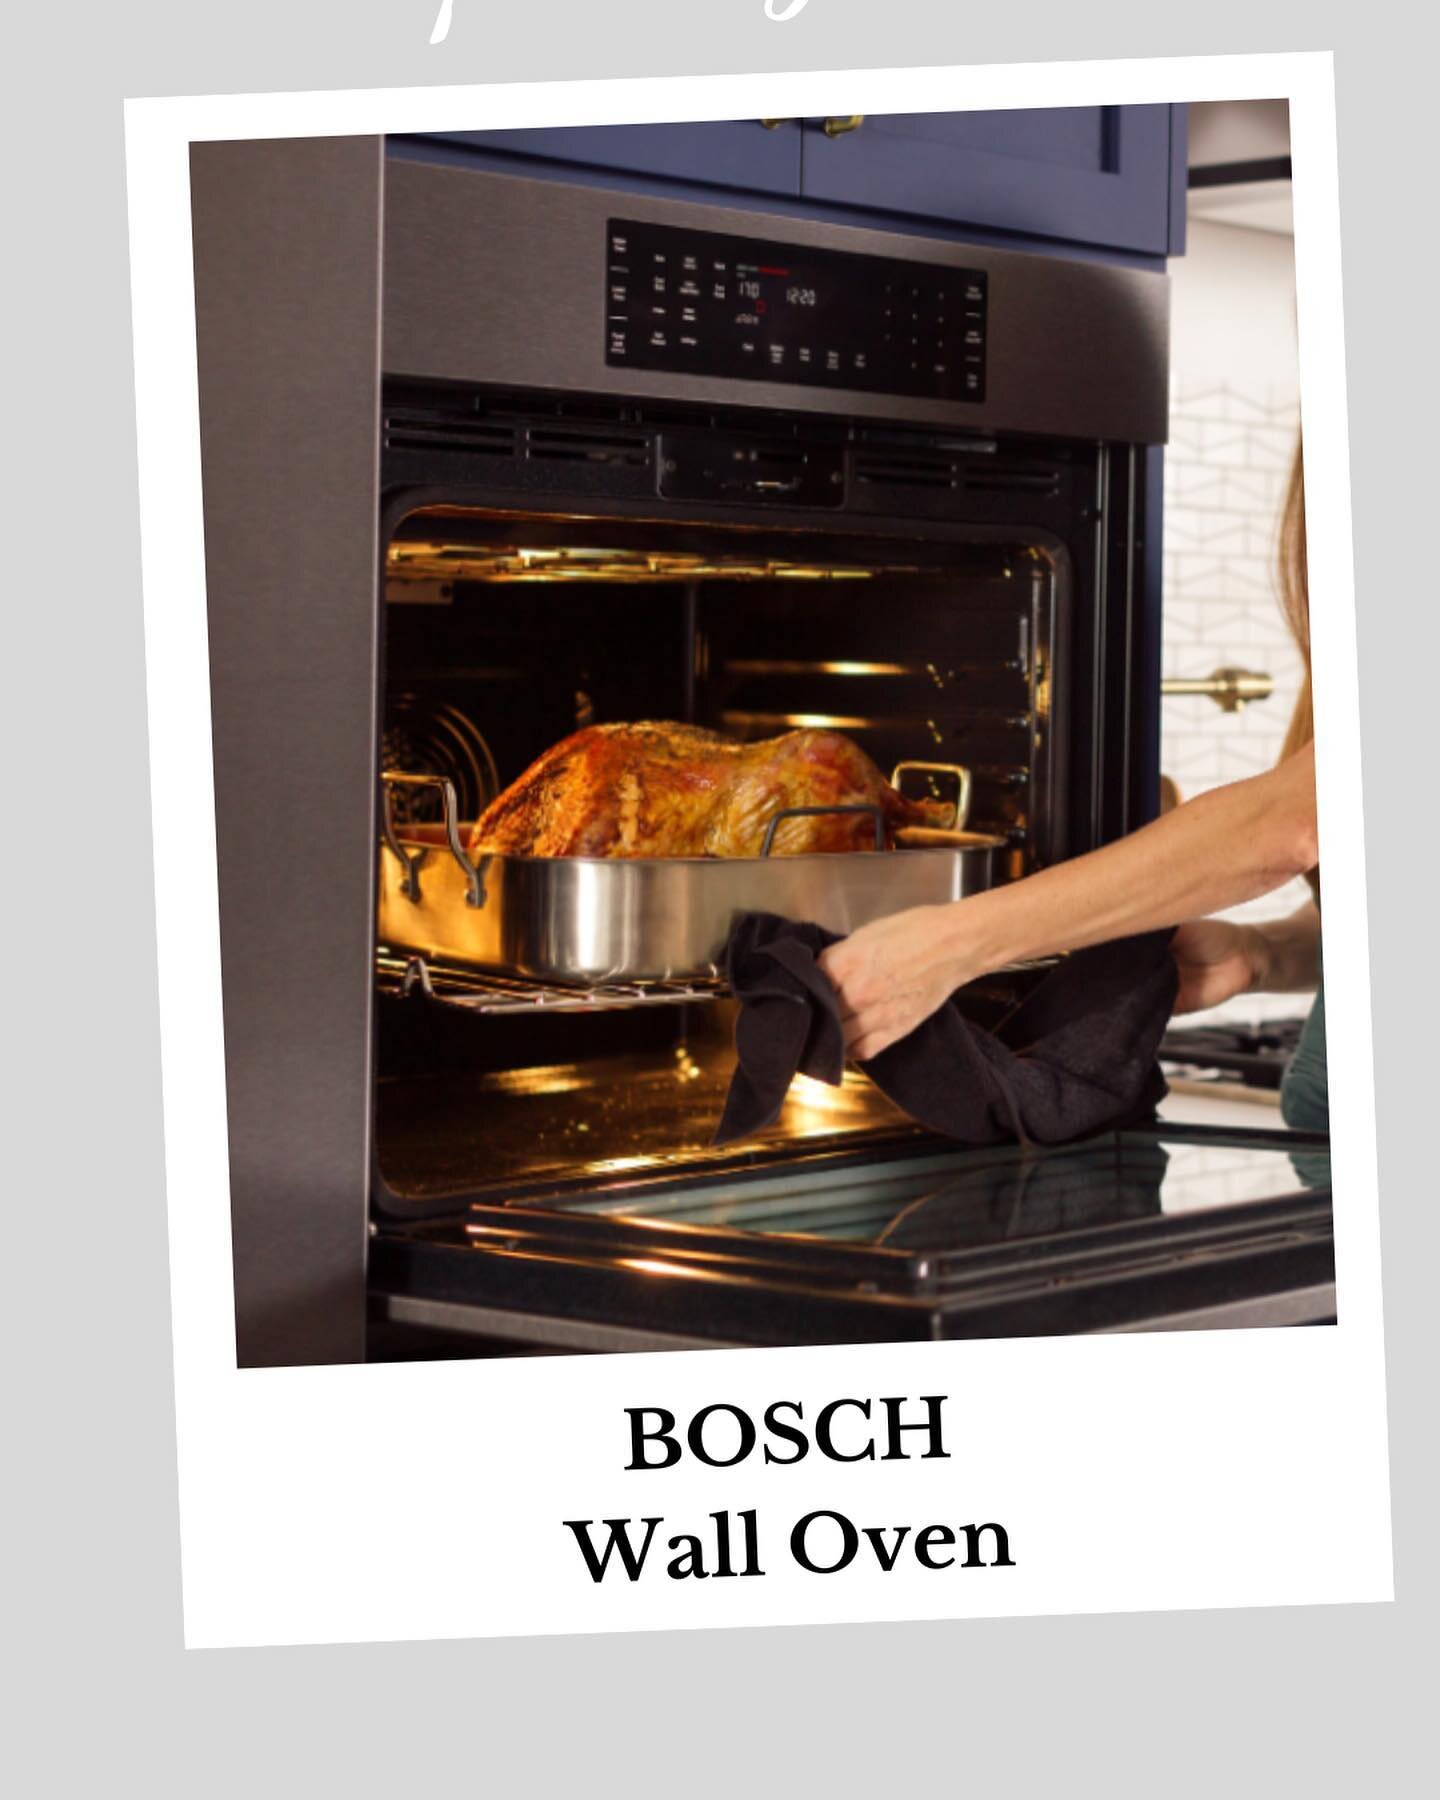 MONDAY SPOTLIGHT!!✨✨

The Bosch Wall-Oven offers the largest capacity on the market!! Comes as single oven, compact oven, energy officiant, double-walled ovens with so many cooking &amp; baking features!!